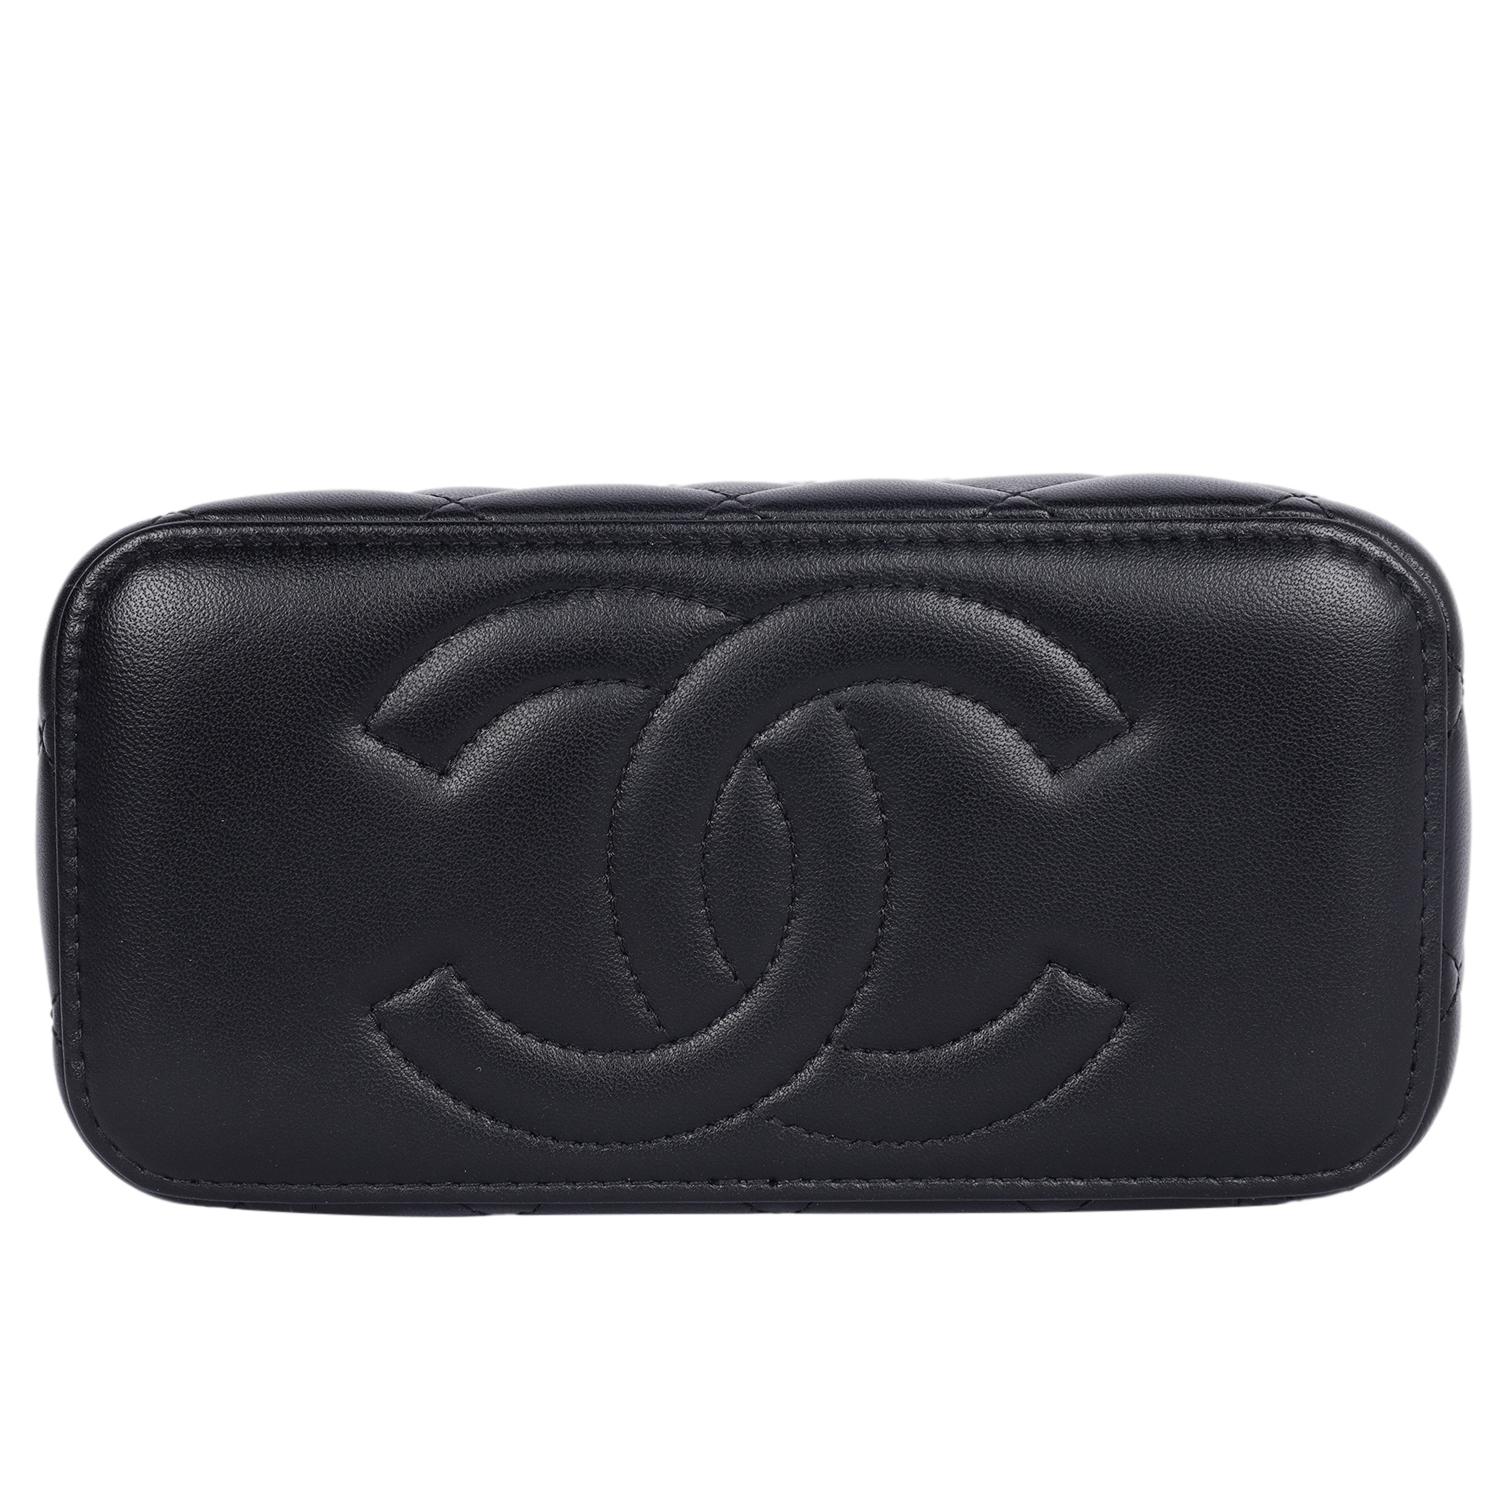 Chanel Lambskin Quilted Small Top Handle Vanity Case Black Crossbody Bag 7